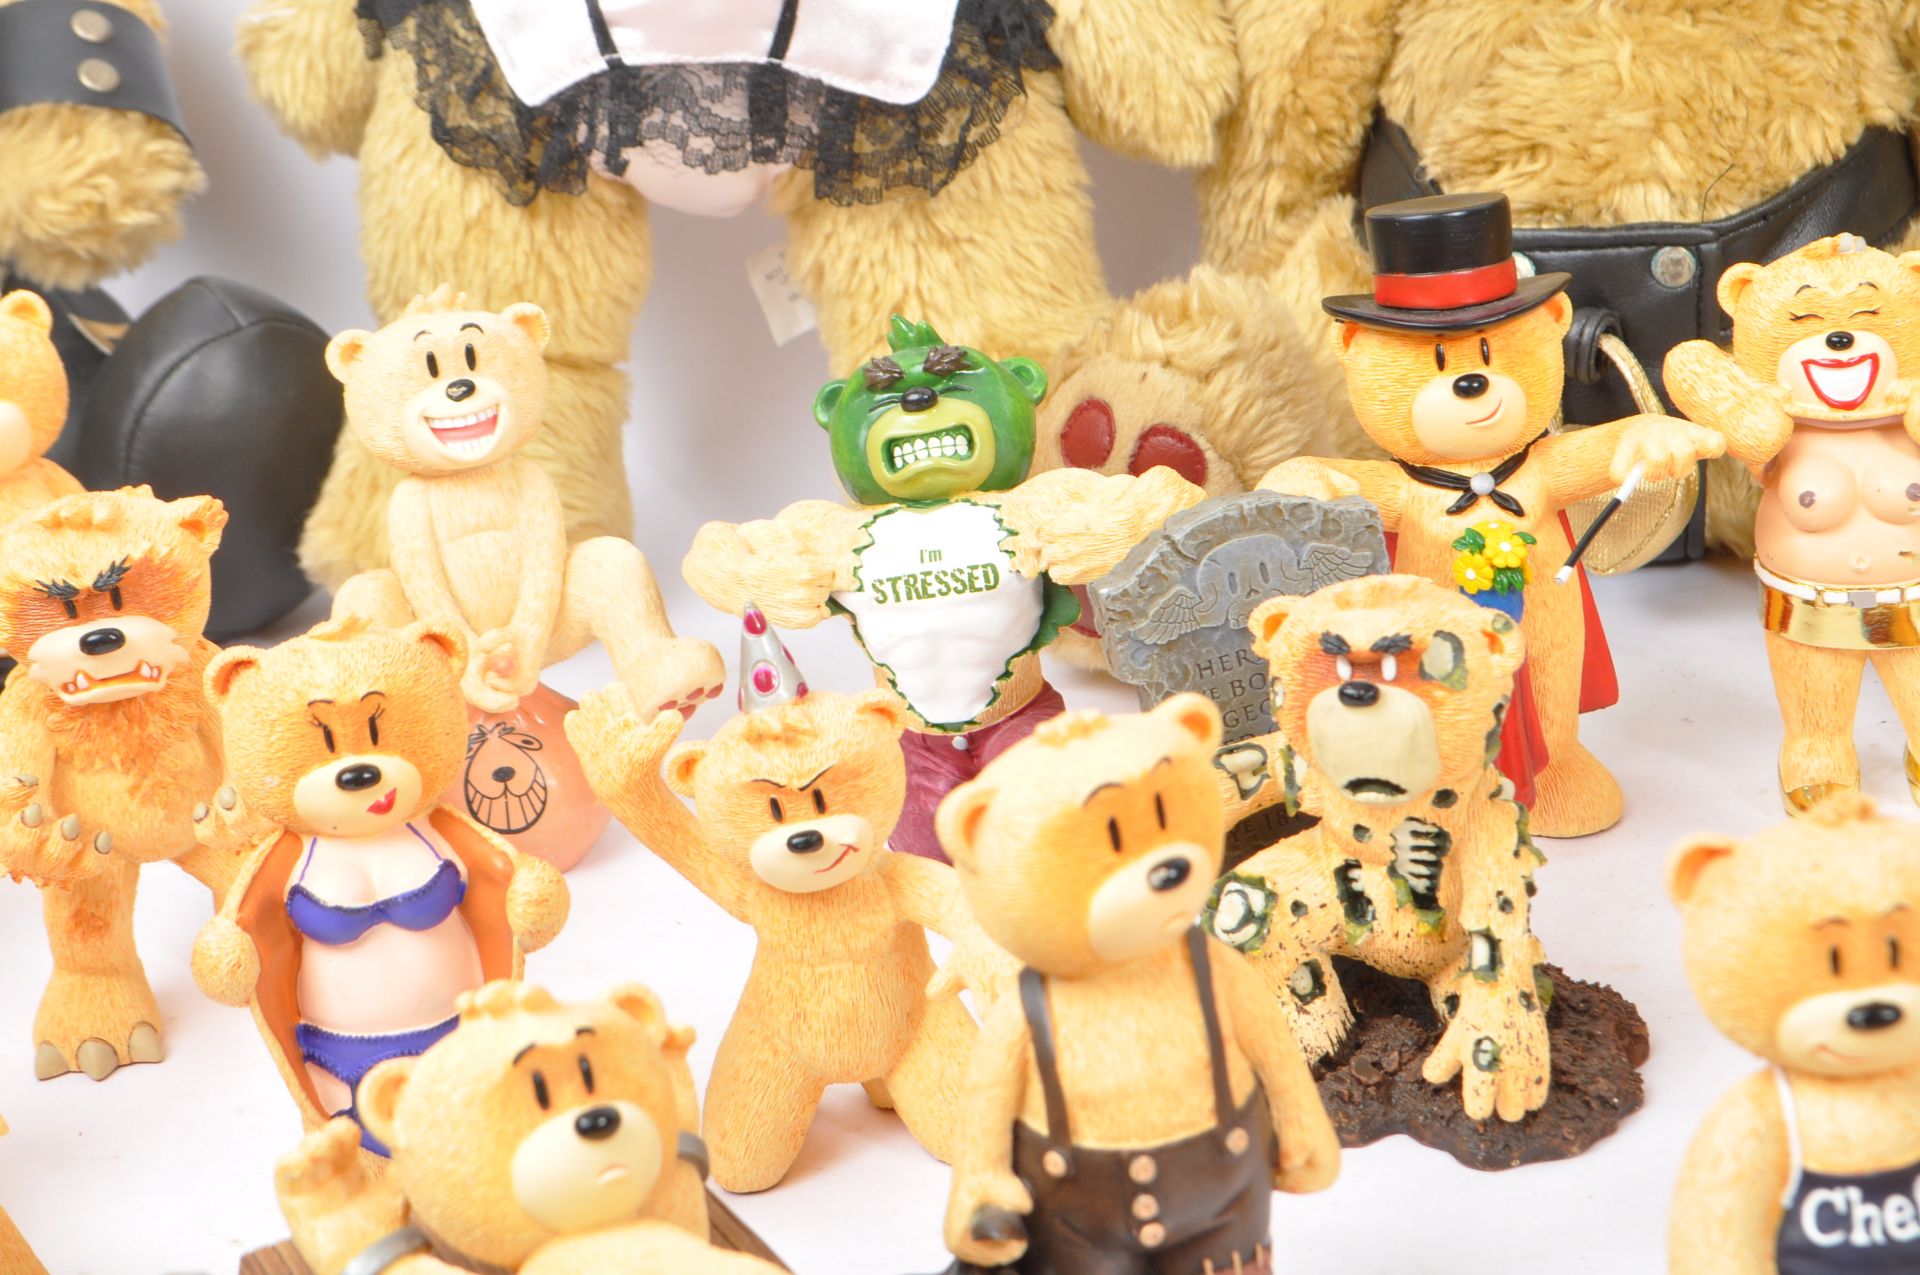 LARGE COLLECTION OF BAD TASTE BEARS FIGURINES - Image 4 of 12